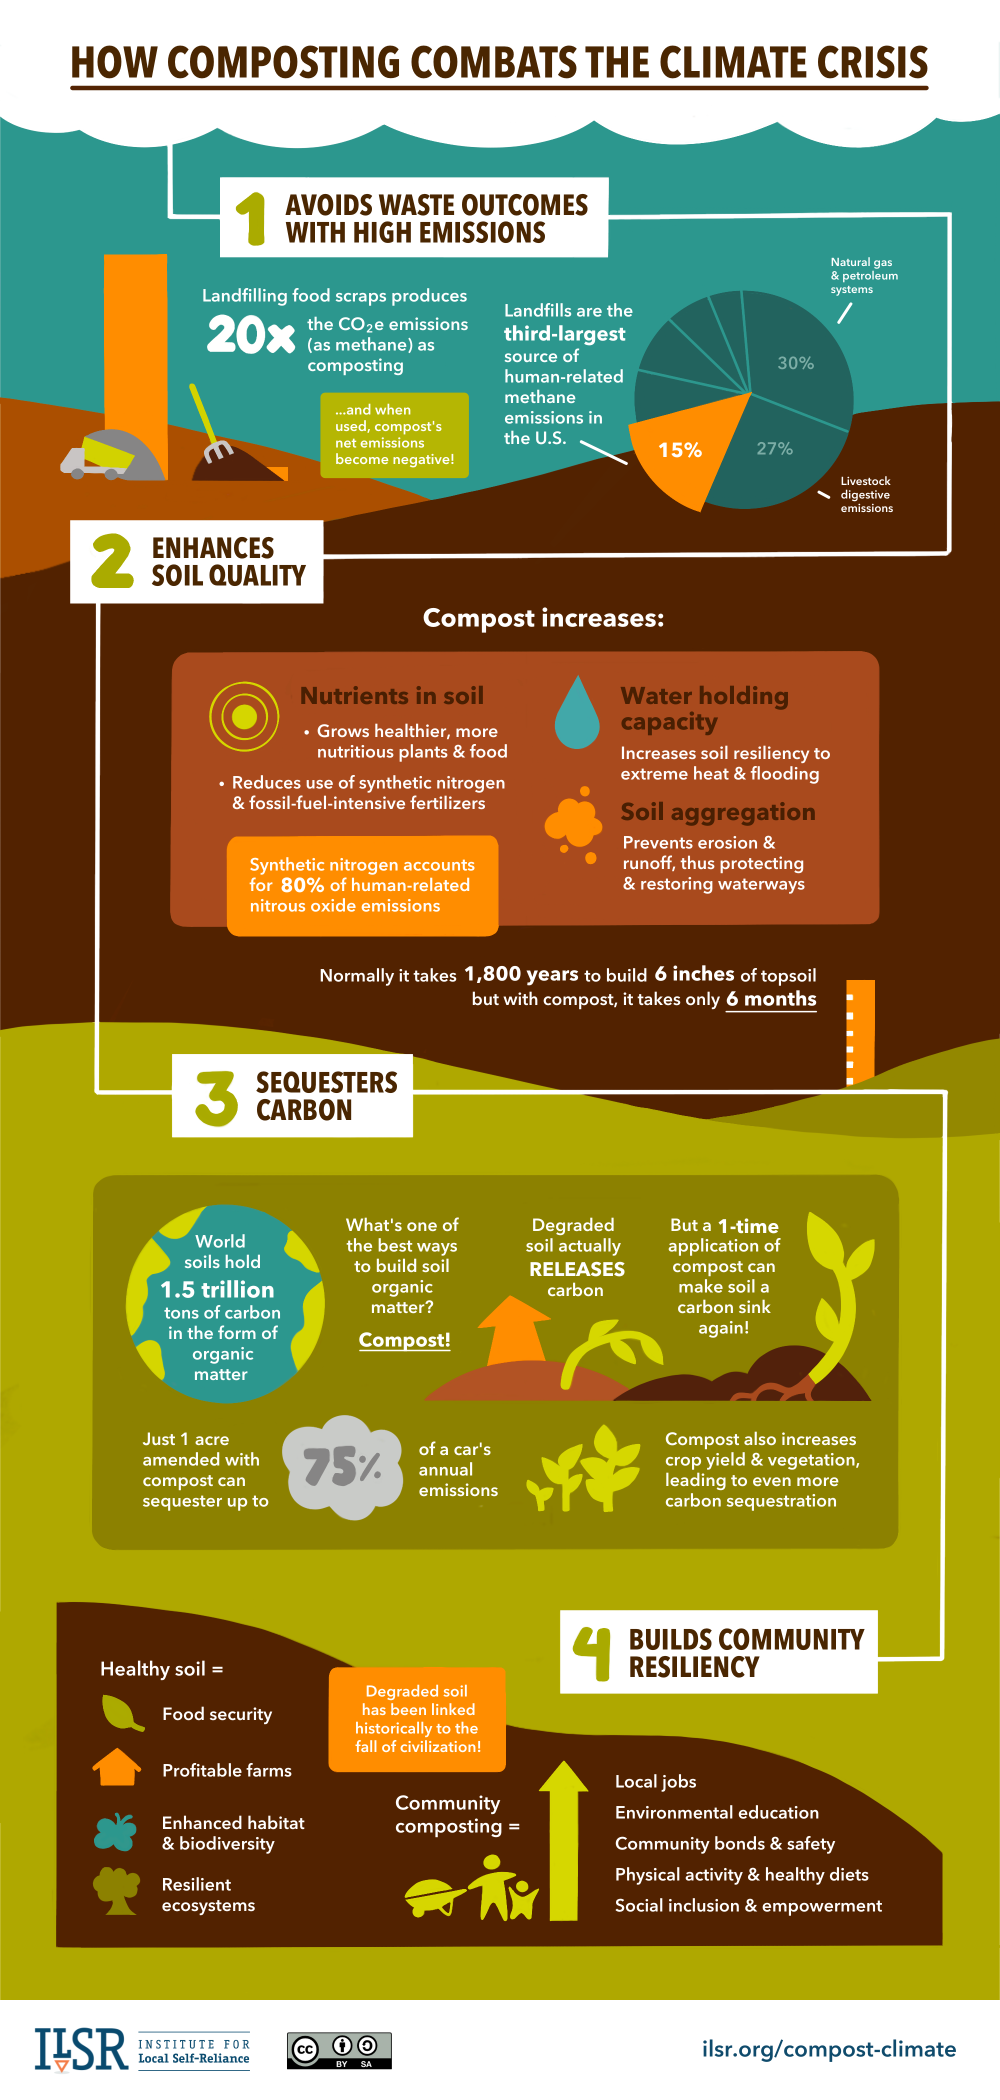 Benefits of Composting - Institute for Local Self-Reliance